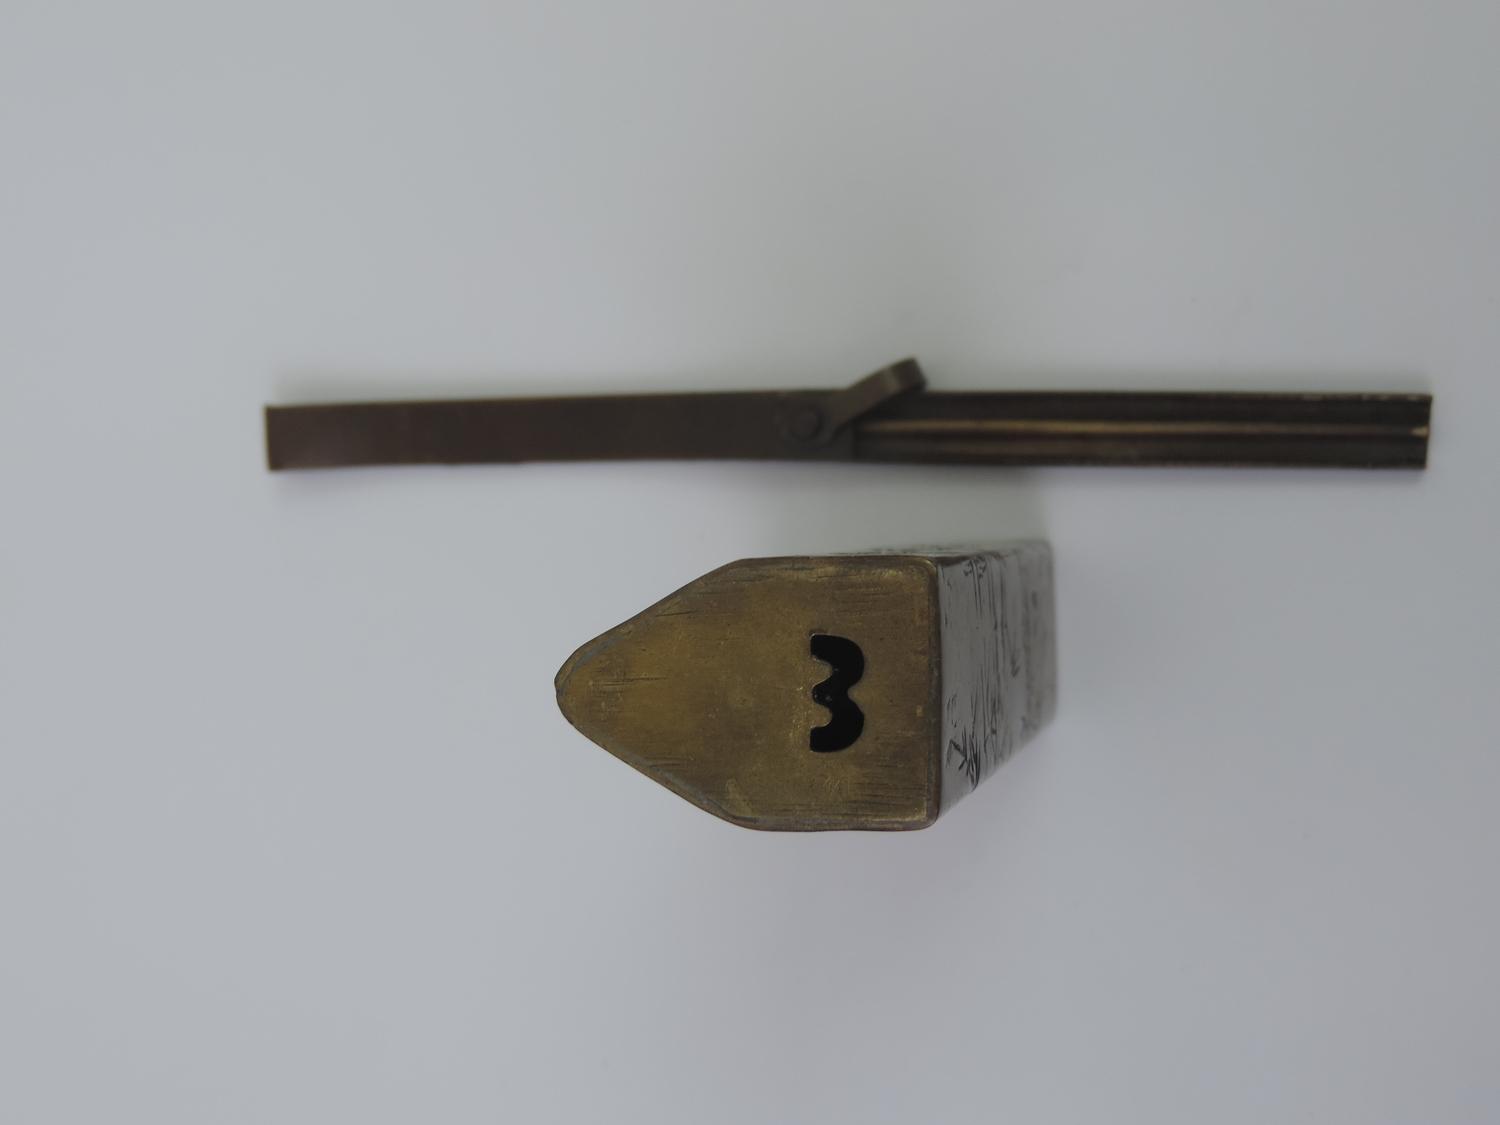 Chinese Brass Padlock with Key - Image 2 of 4